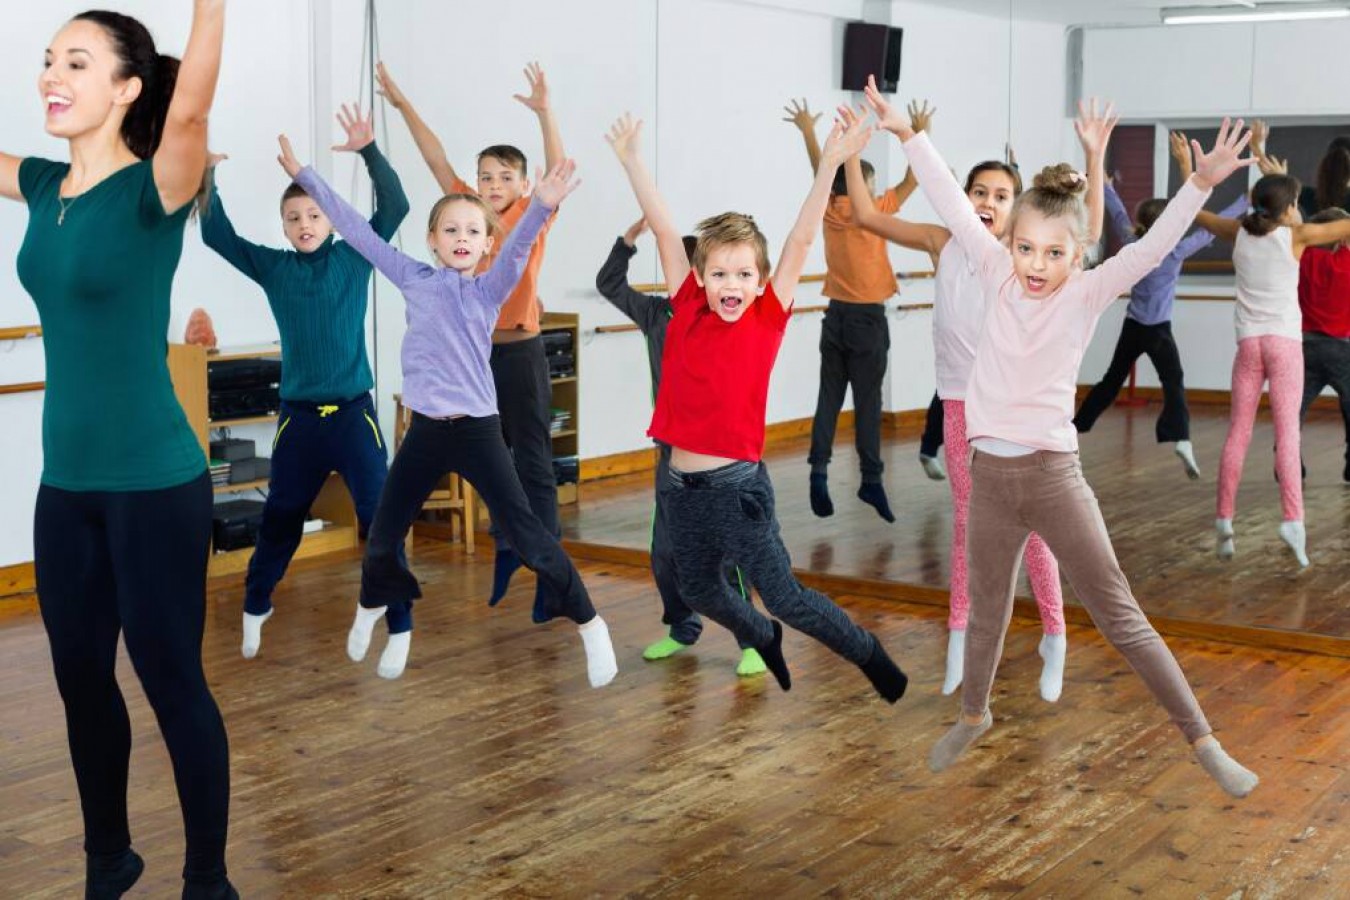  Looking For A Dance Studio? Here Are 7 Things To Look For!